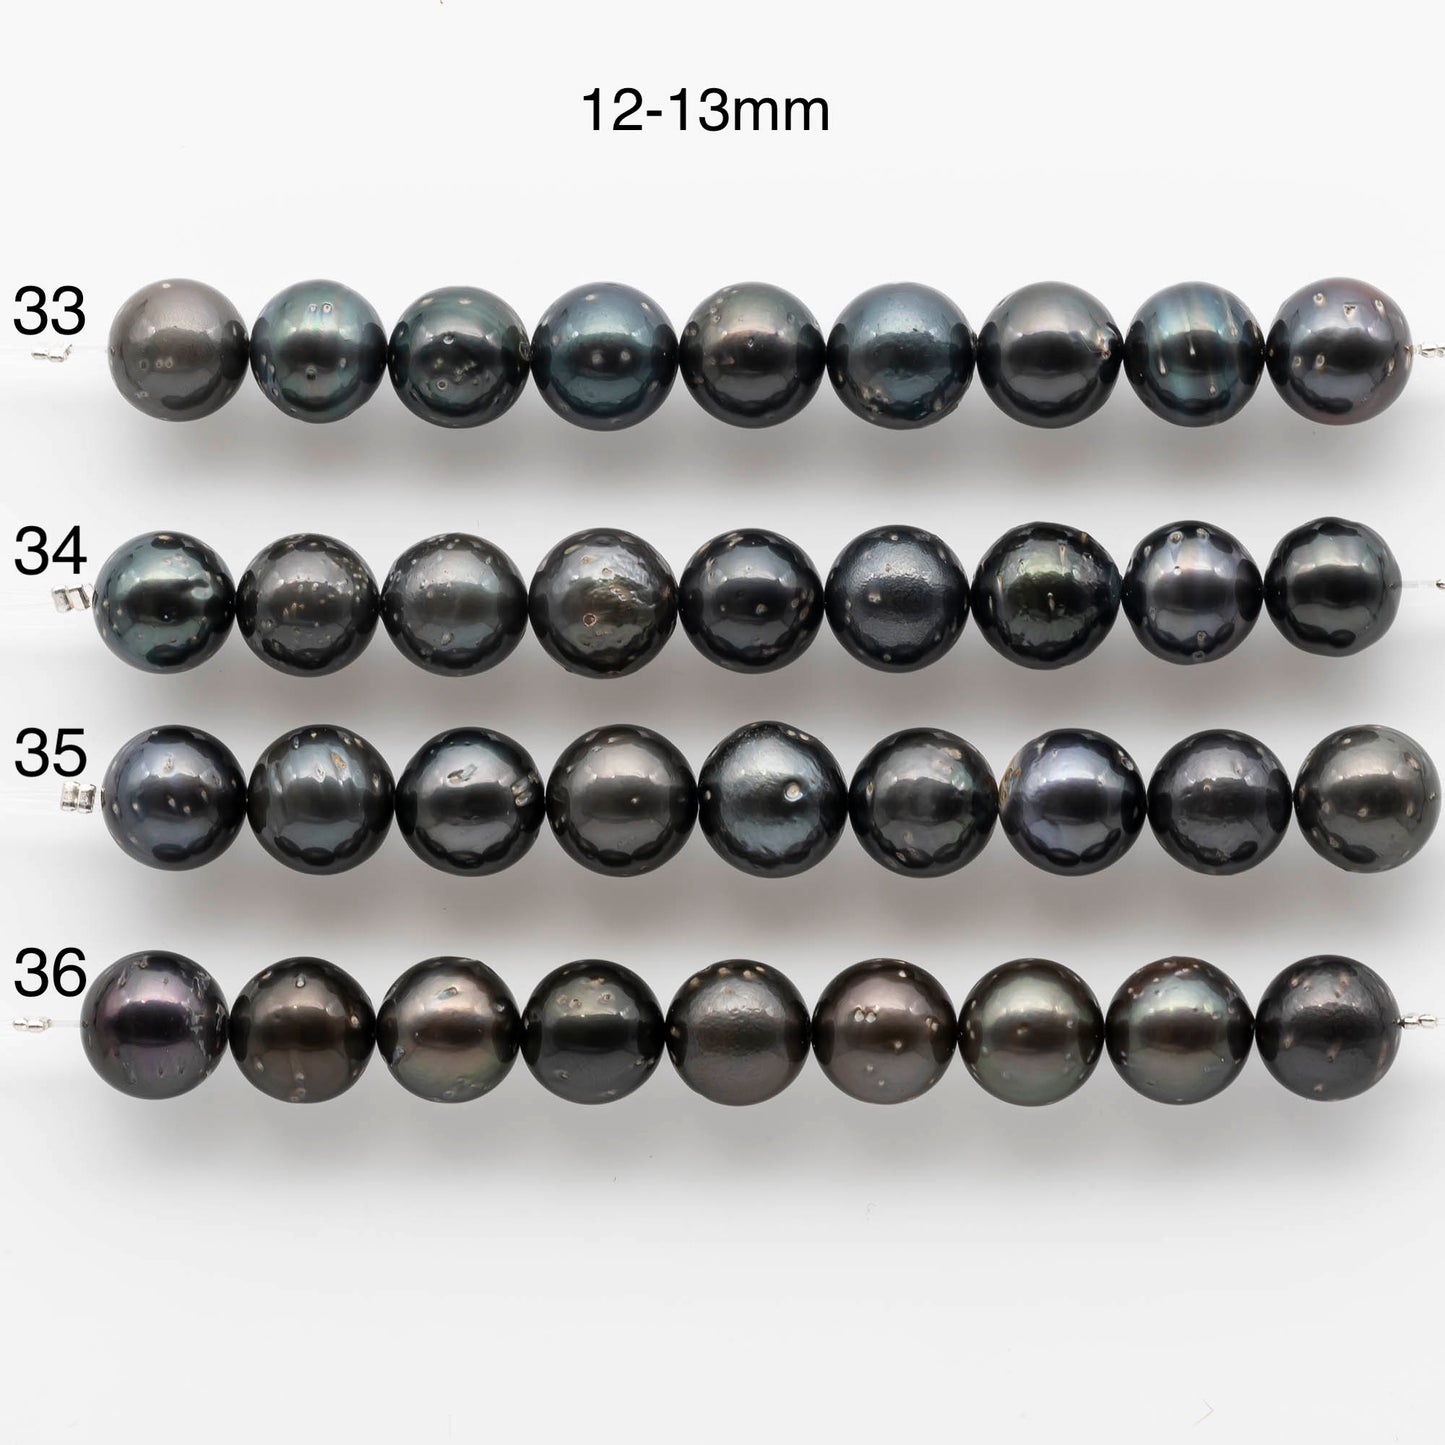 11-13 Round Tahitian Pearl with Lots of Blemishes, Natural Color with Luster for Beading or Jewelry Making in Short Strand, SKU # 1702TH